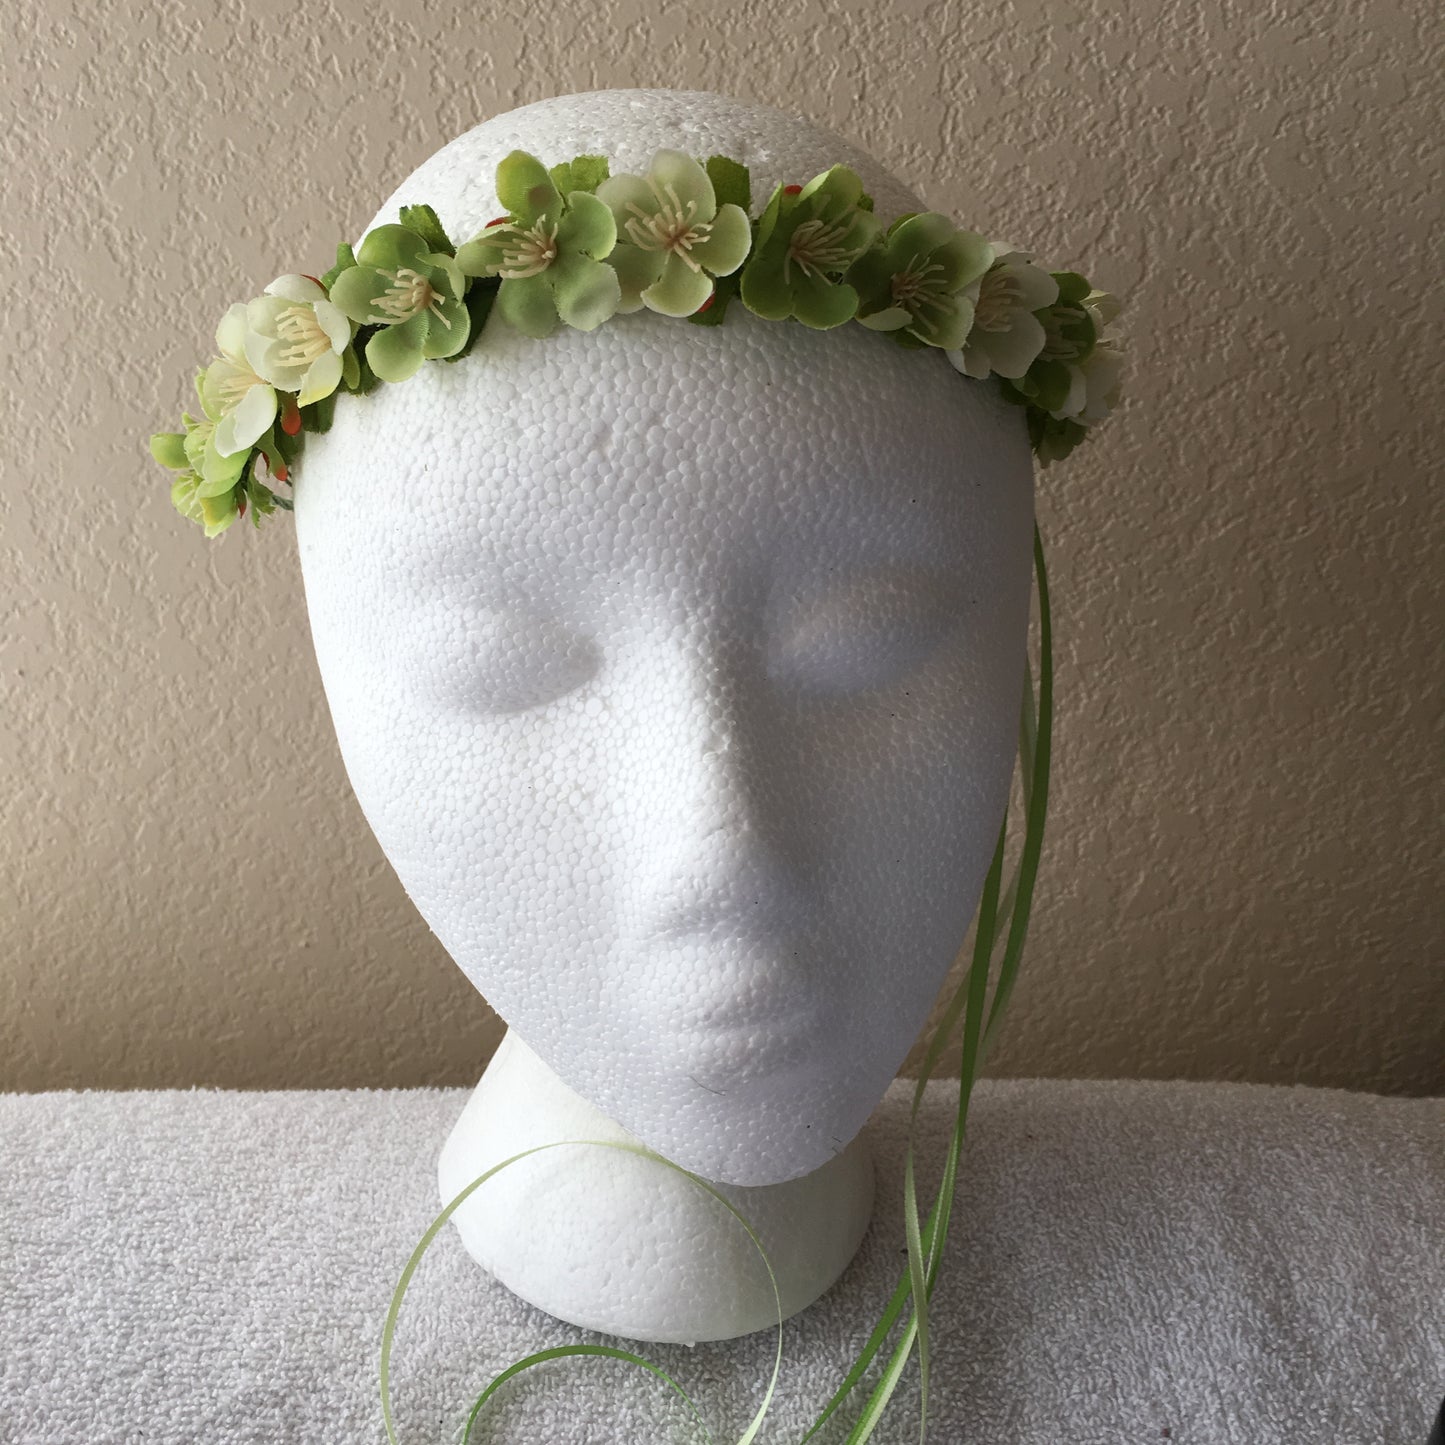 Extra Small Wreath - Two shades of green flowers (2)